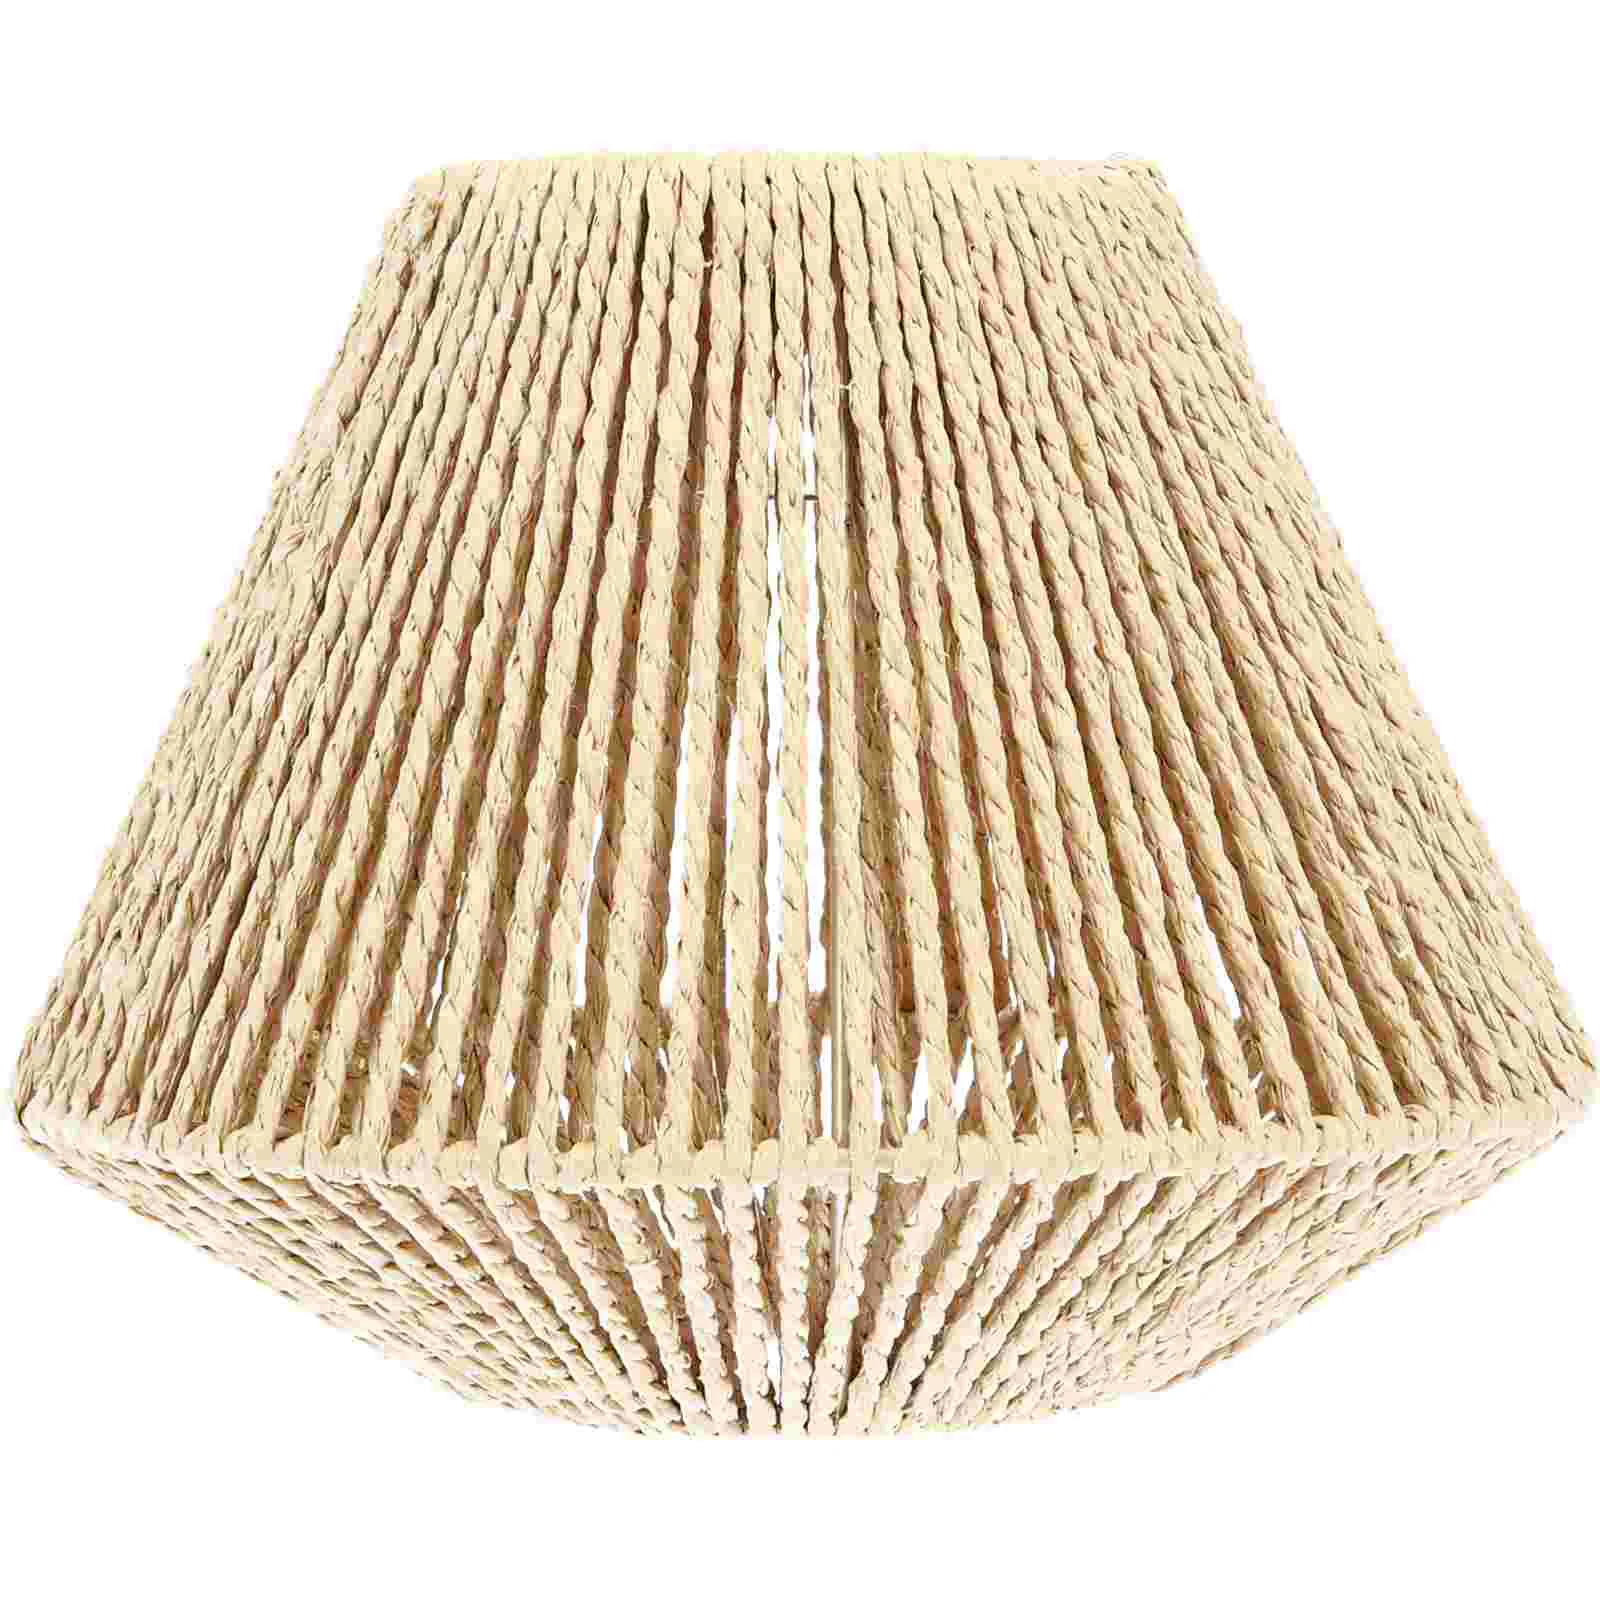 Rattan Lampshade Rustic Wall Sconces Retro Lampshades Chandelier Cover S... - $23.06